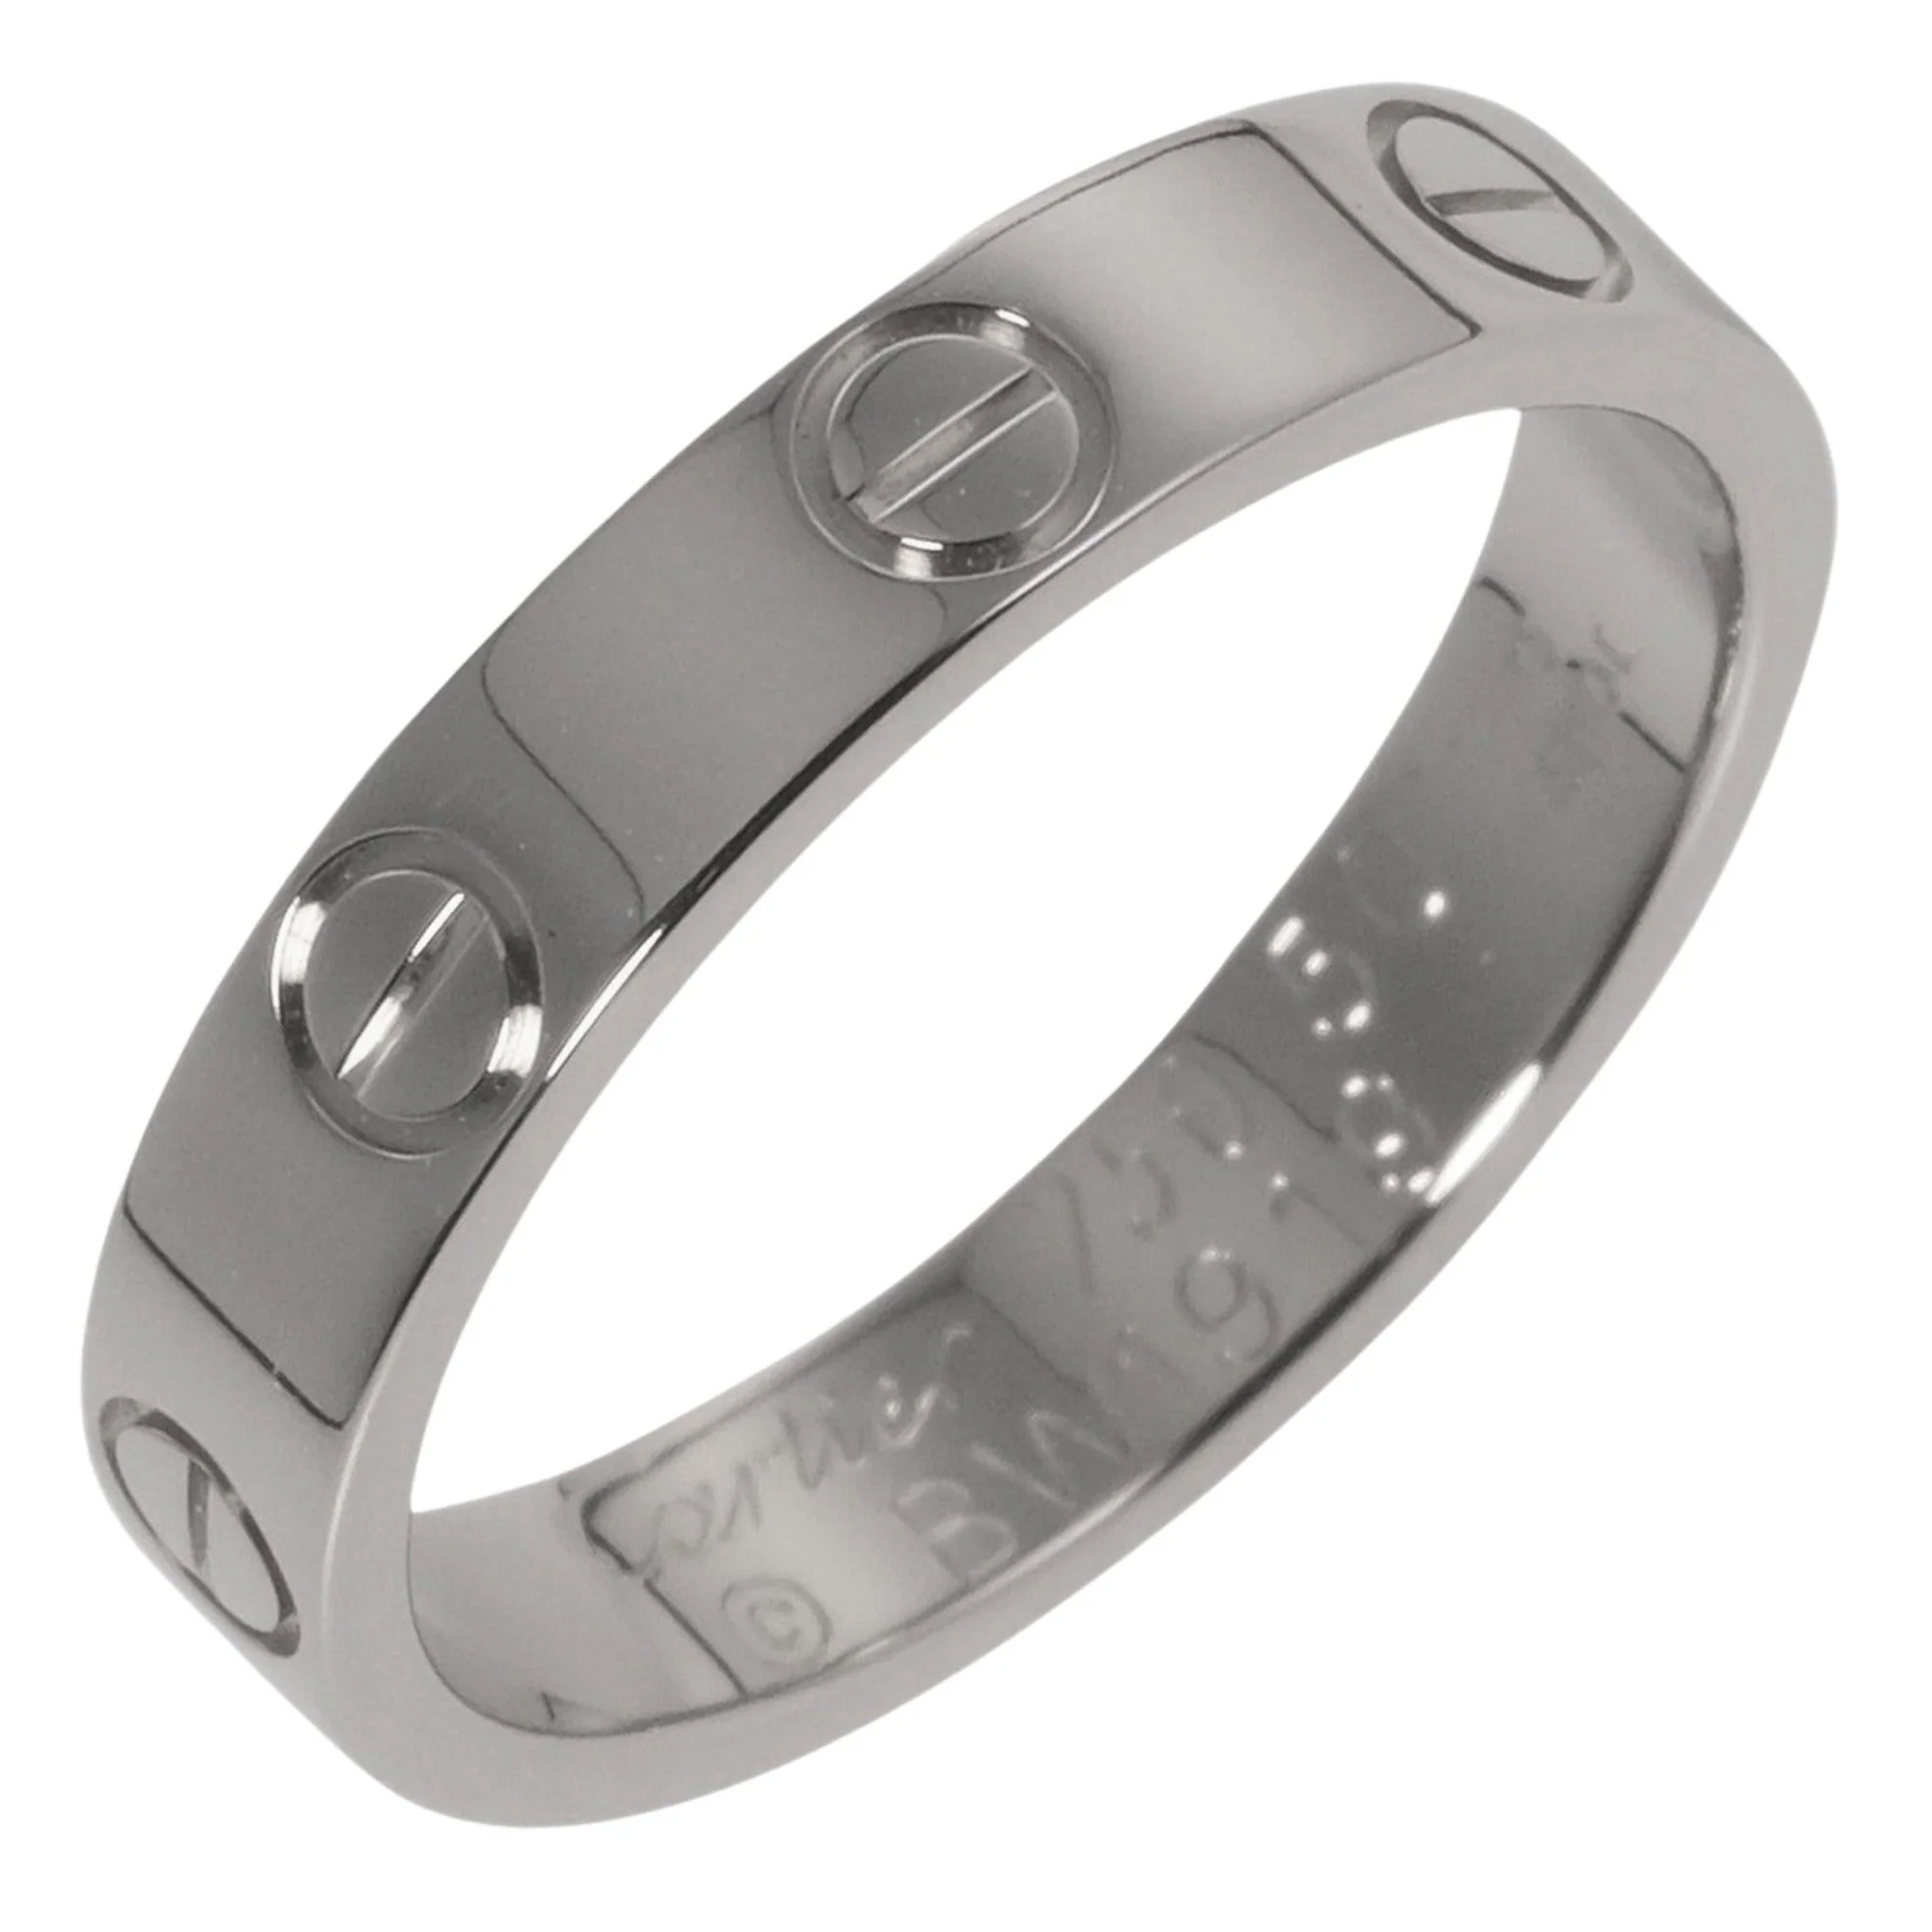 Unisex Cartier Love Ring - Silver $6639